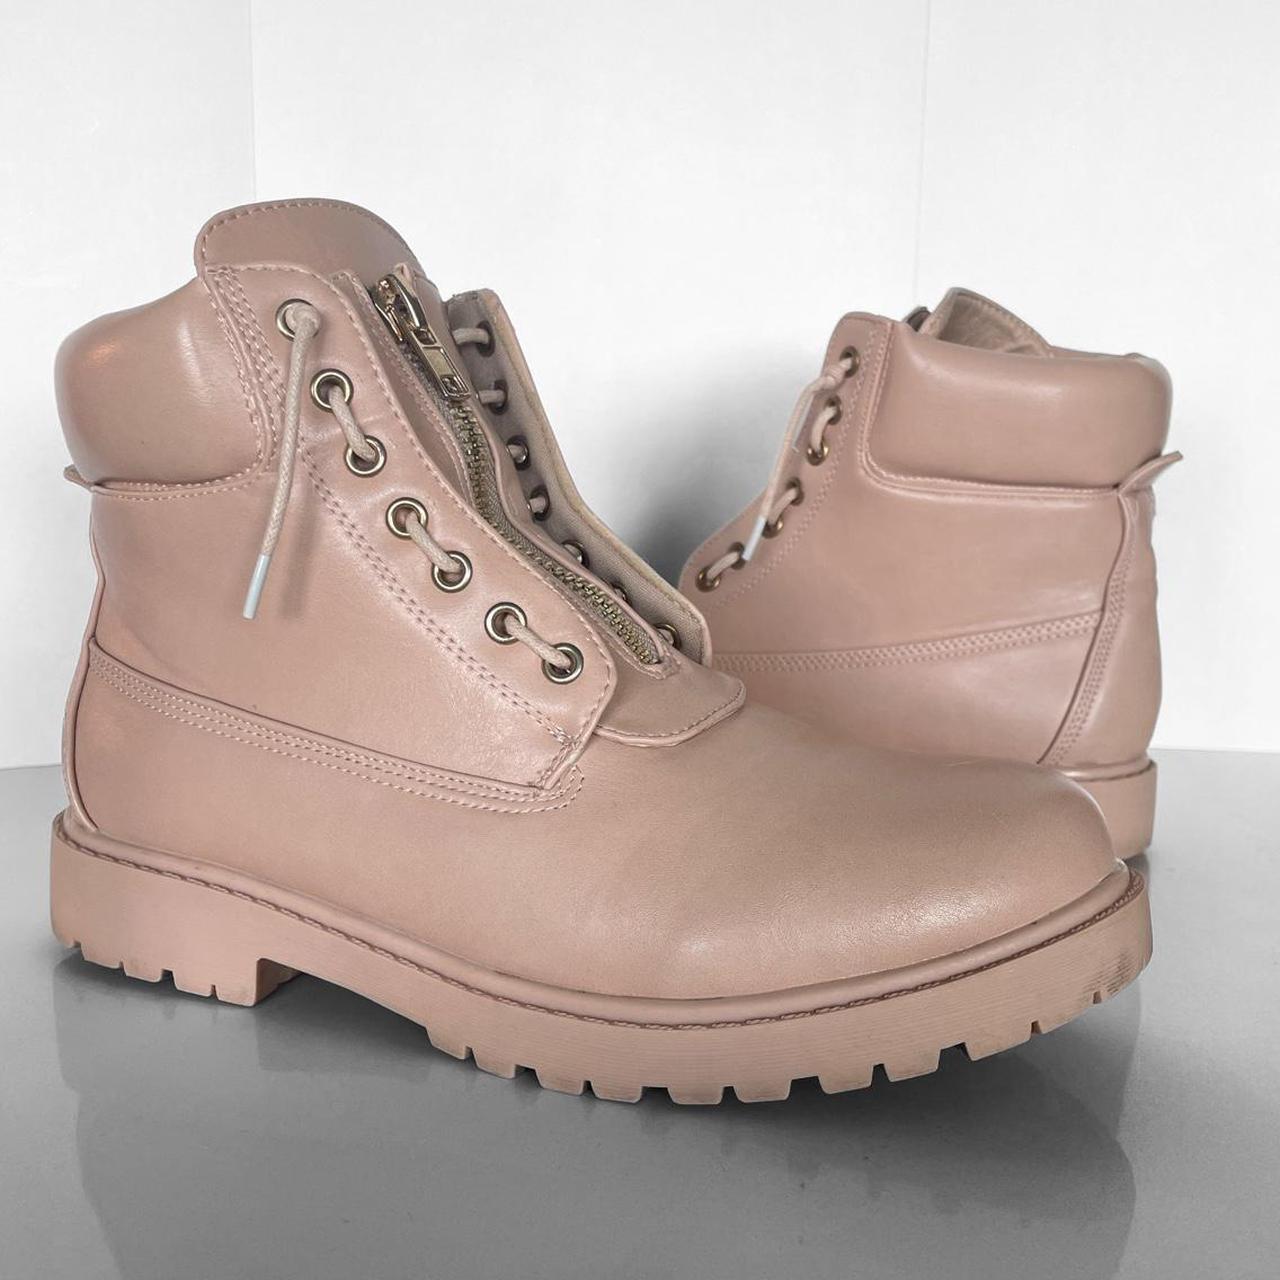 Balmain Taiga Leather Military Boots in Pink